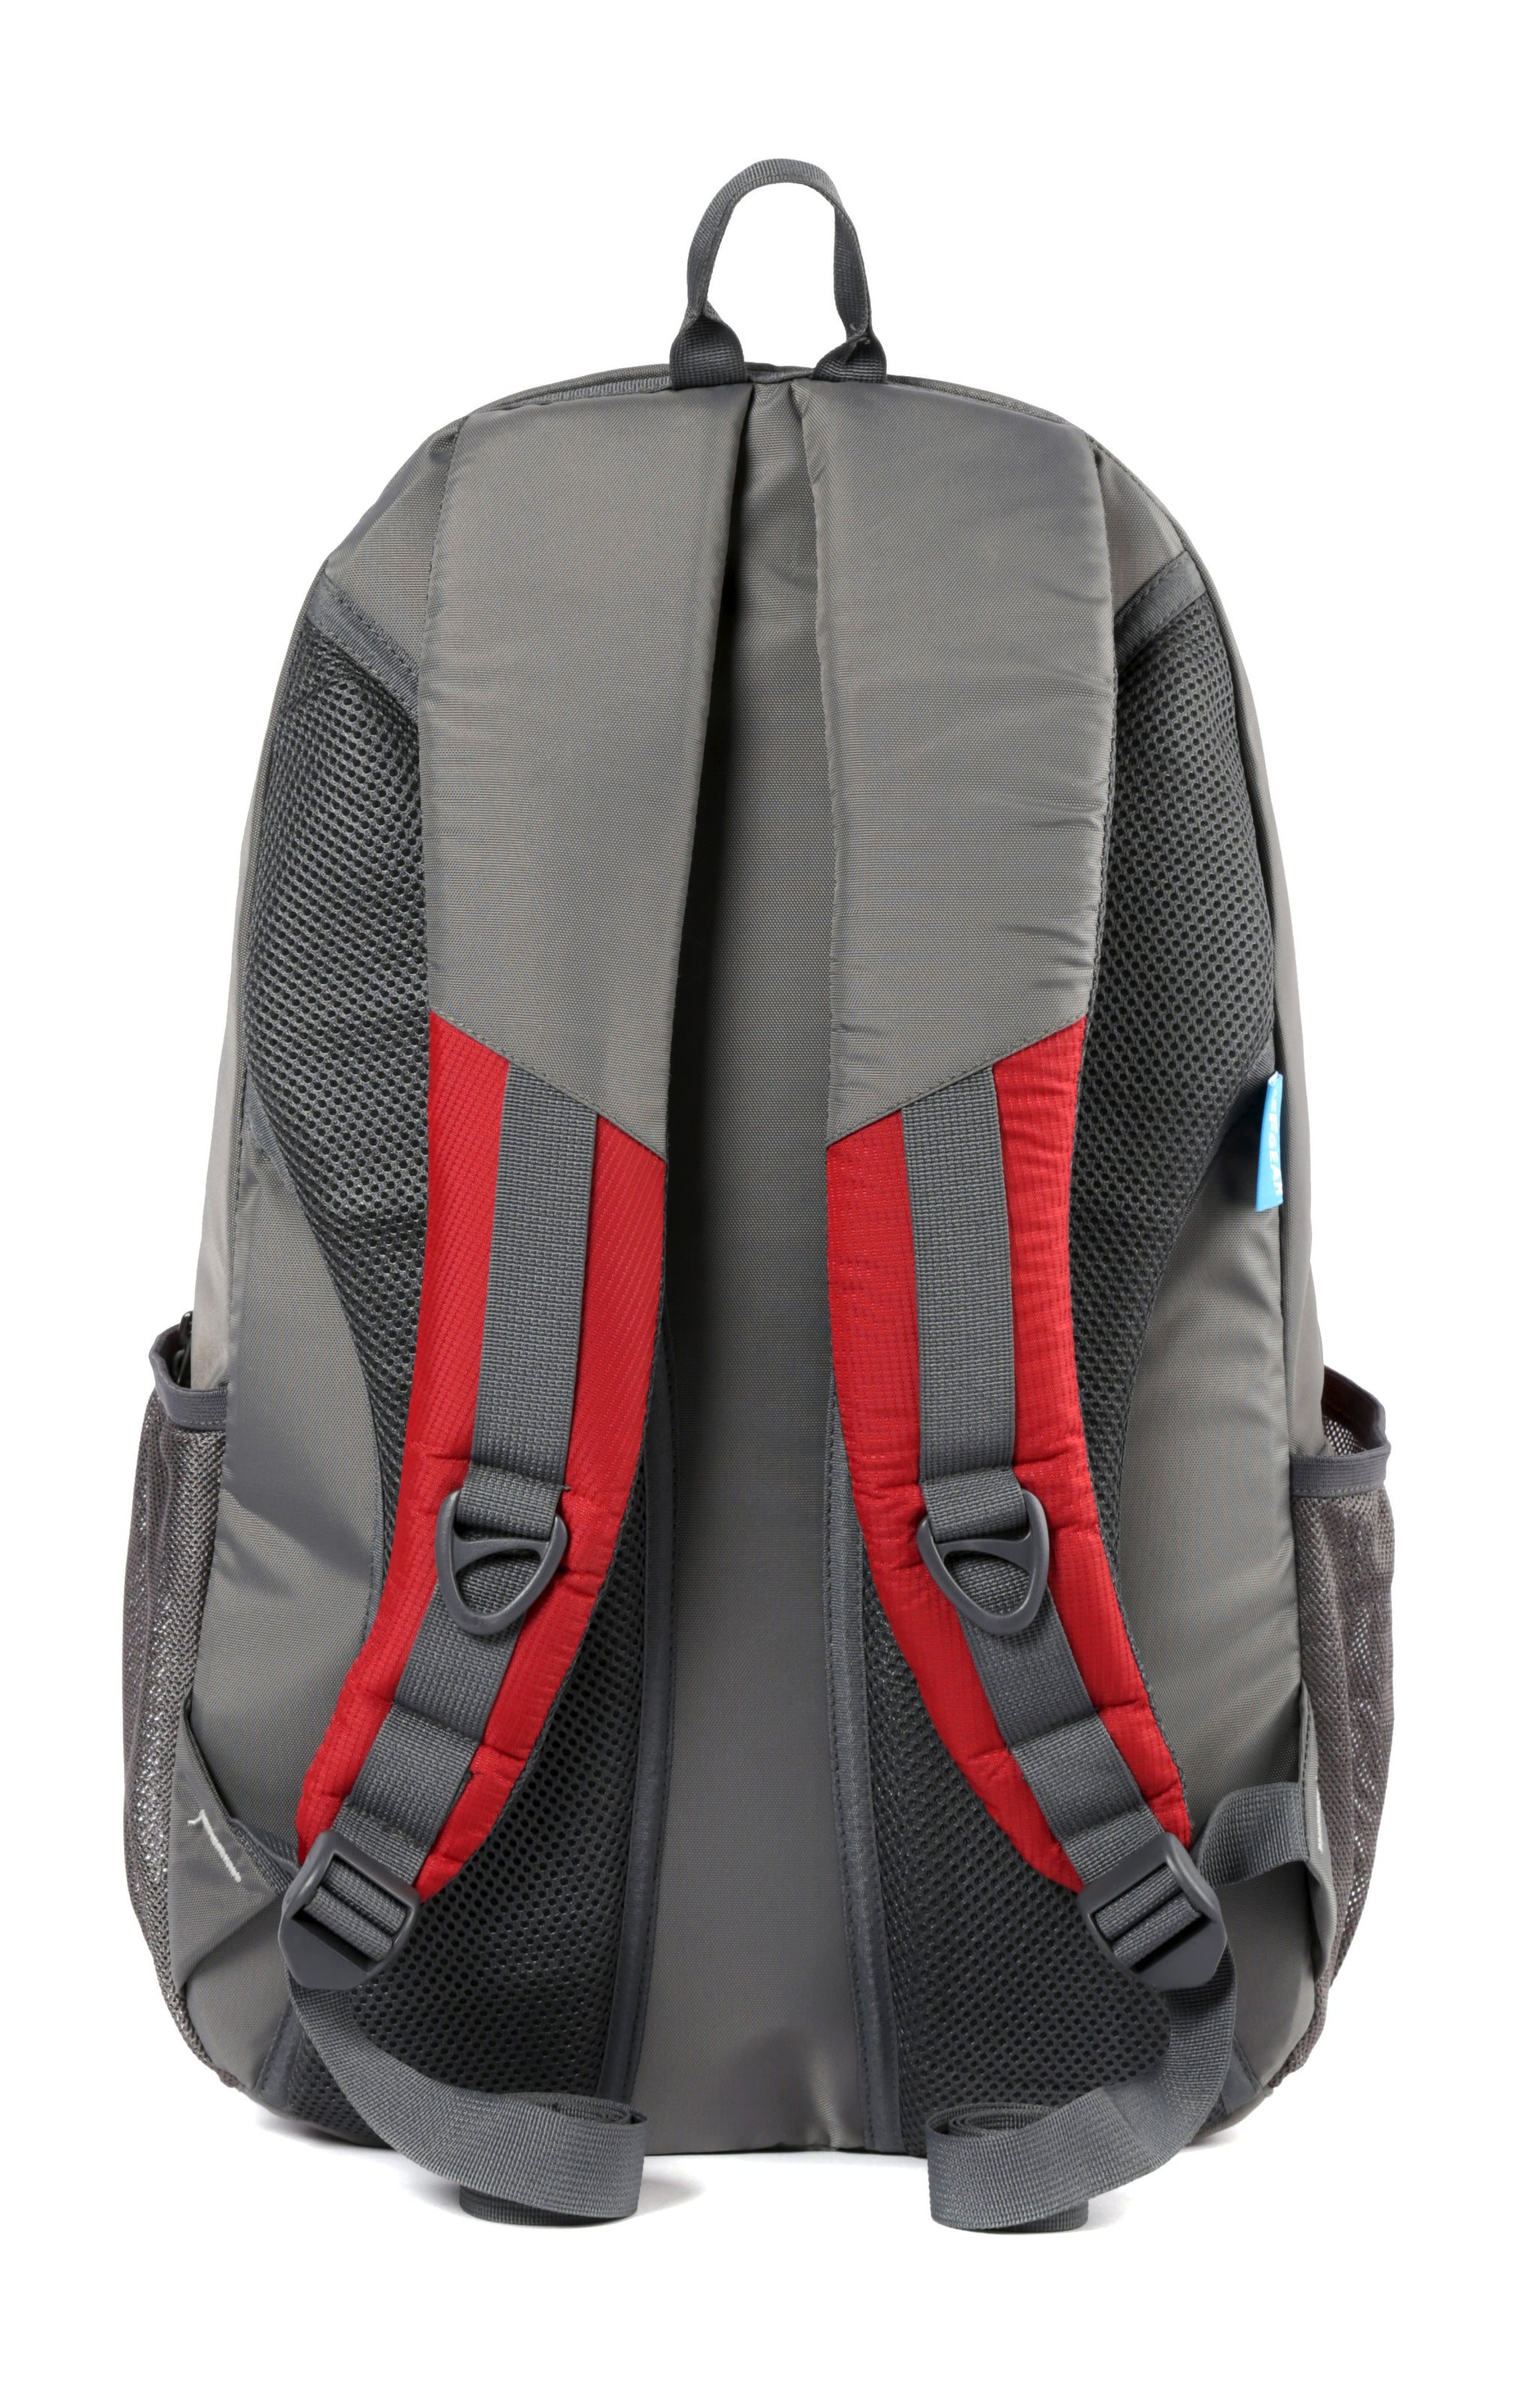 F Gear Arsenal Red, Grey 28 Liters Backpack (3131)